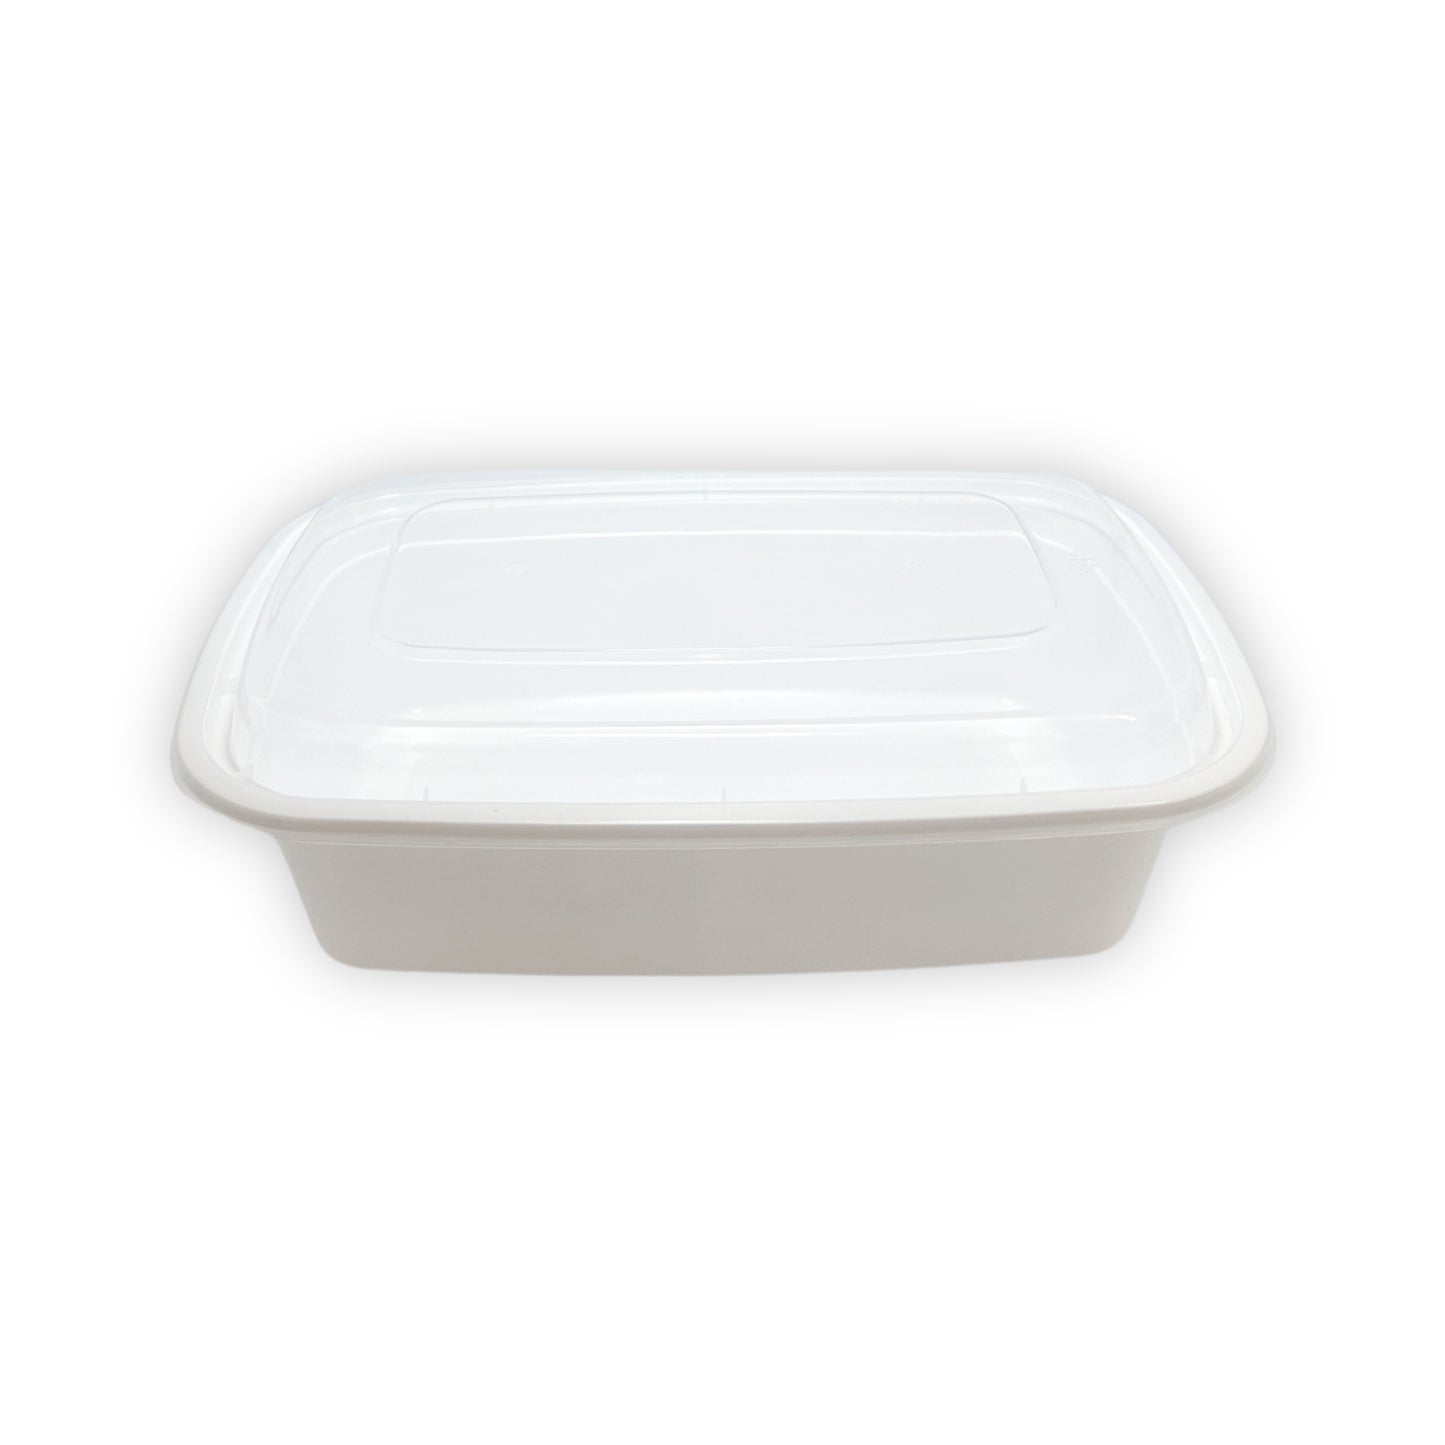 KIS-KY38G | 150sets 38oz, 1124ml White PP Rectangle Container with Clear Lids Combo; $0.258/set